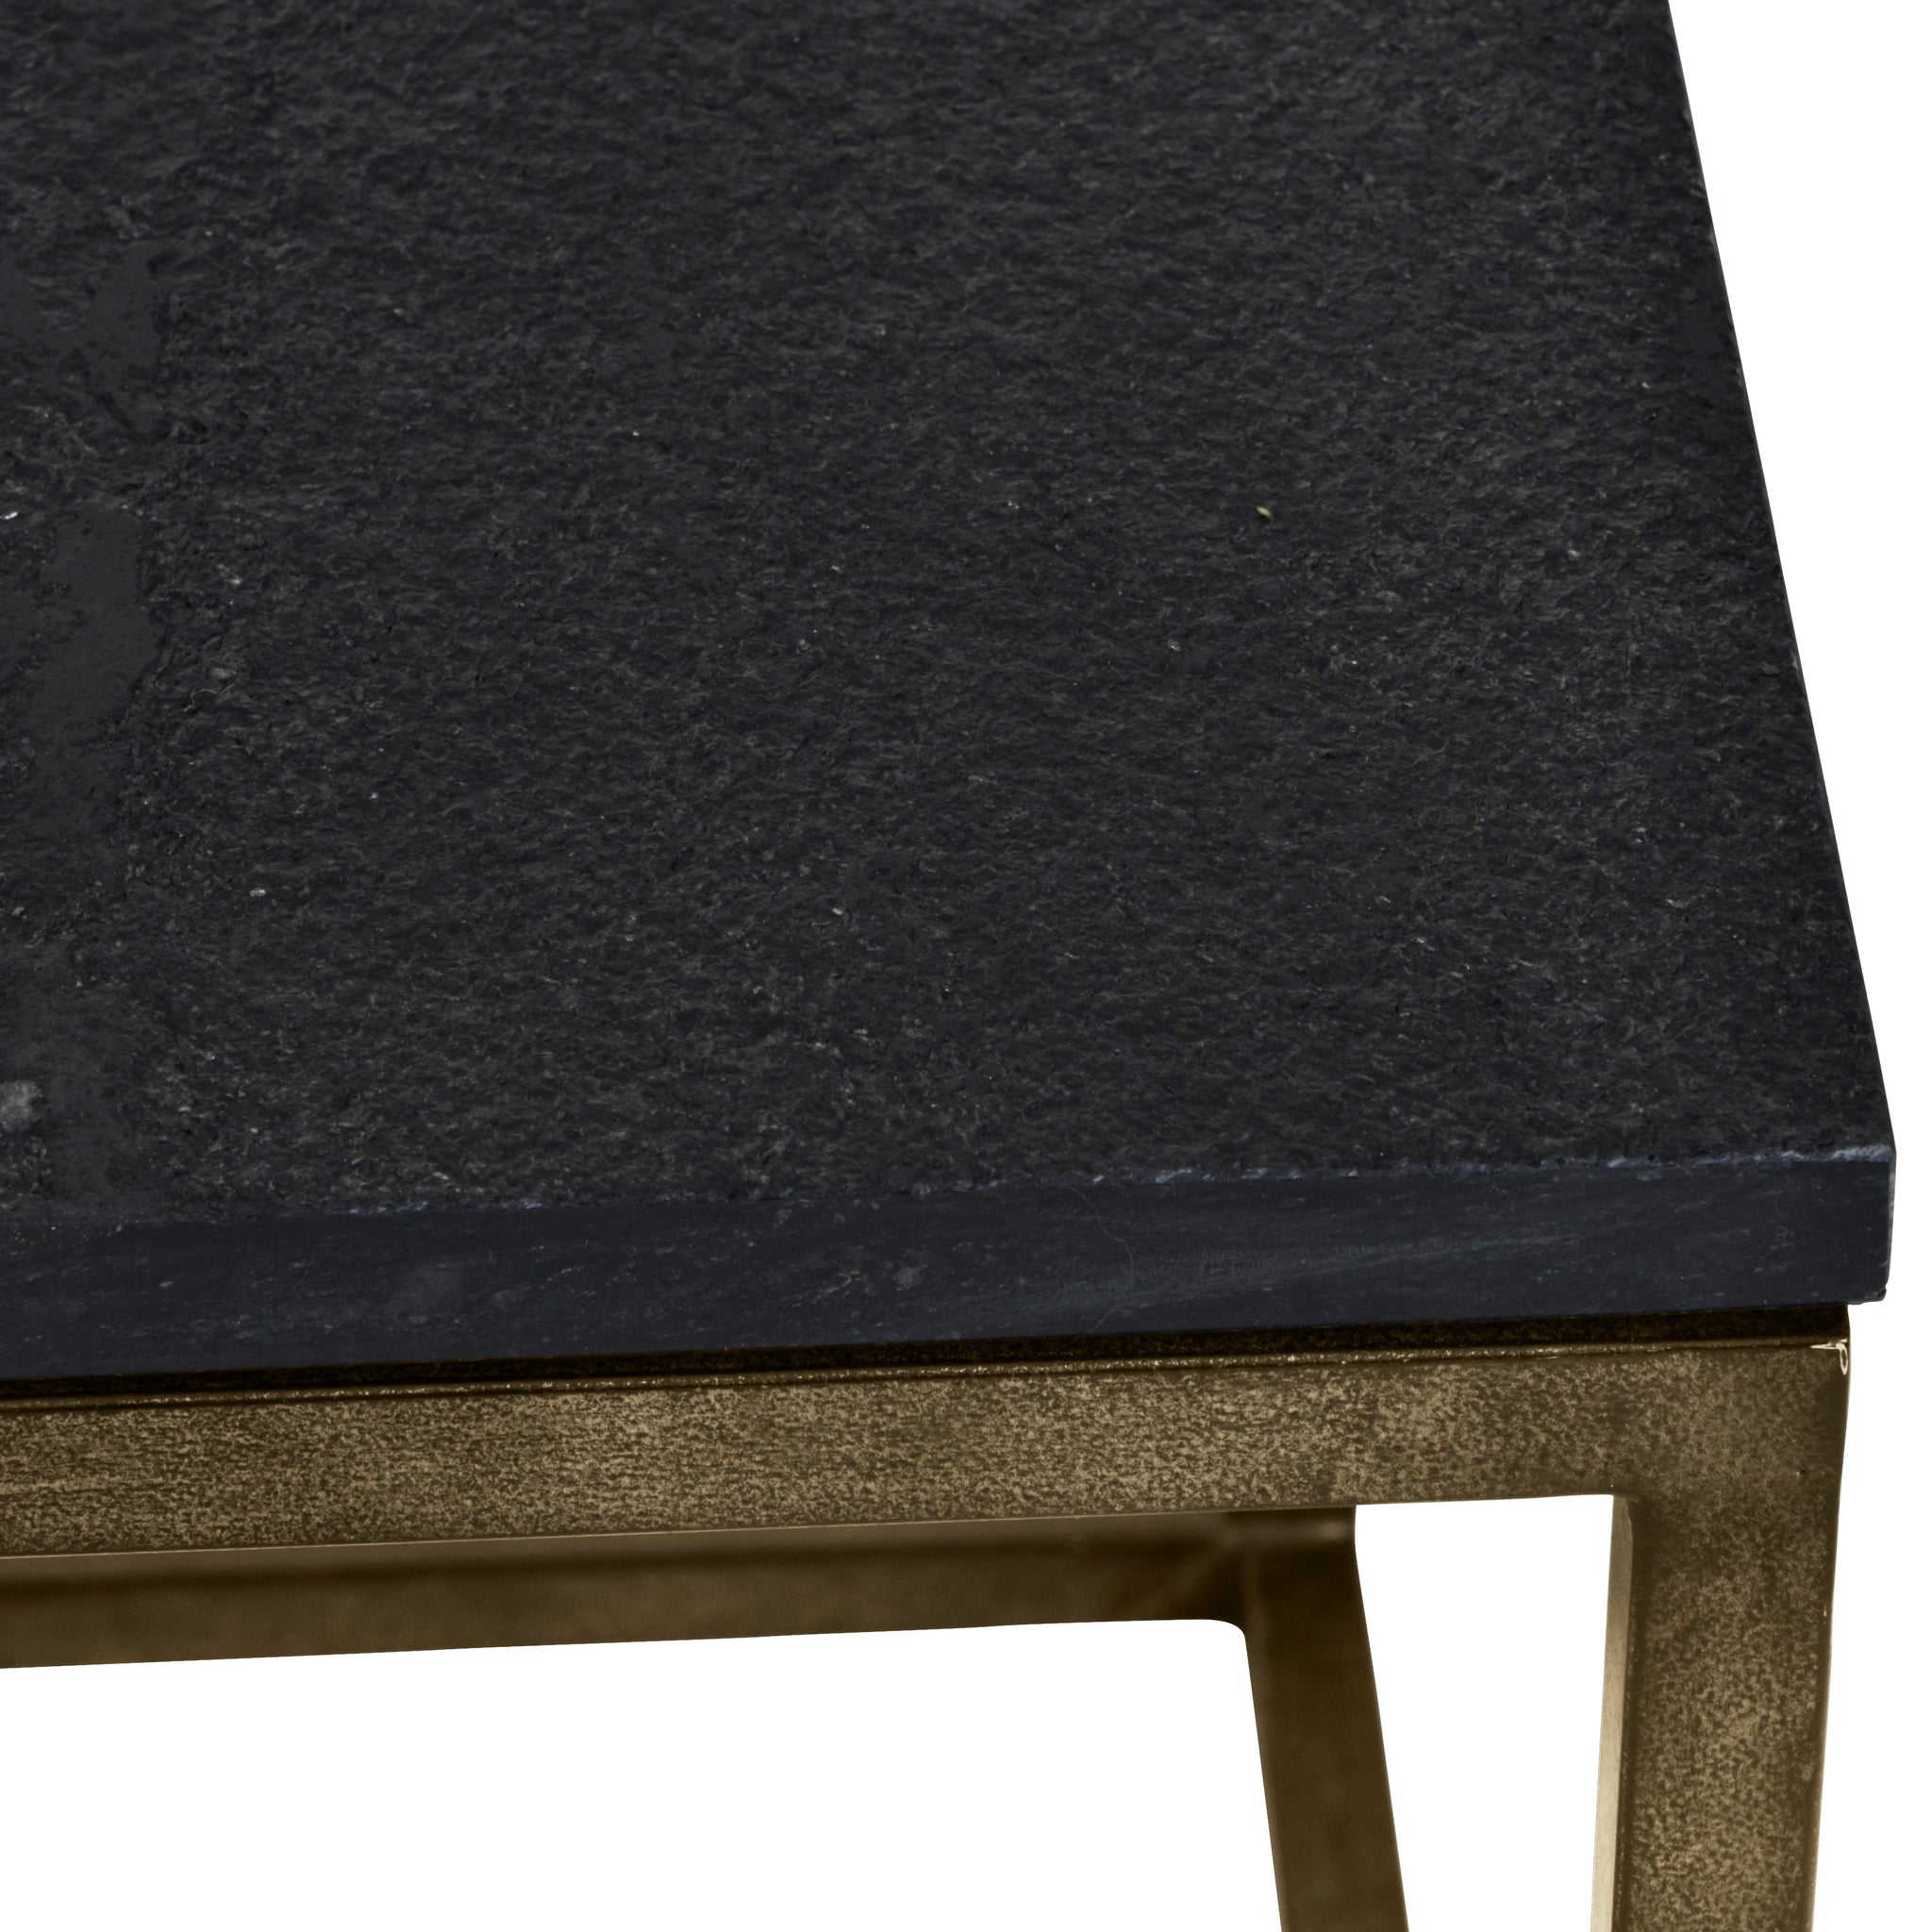 Forge Iron Set of 2 Side Tables in Aged Champagne Finish with Galaxy Slate